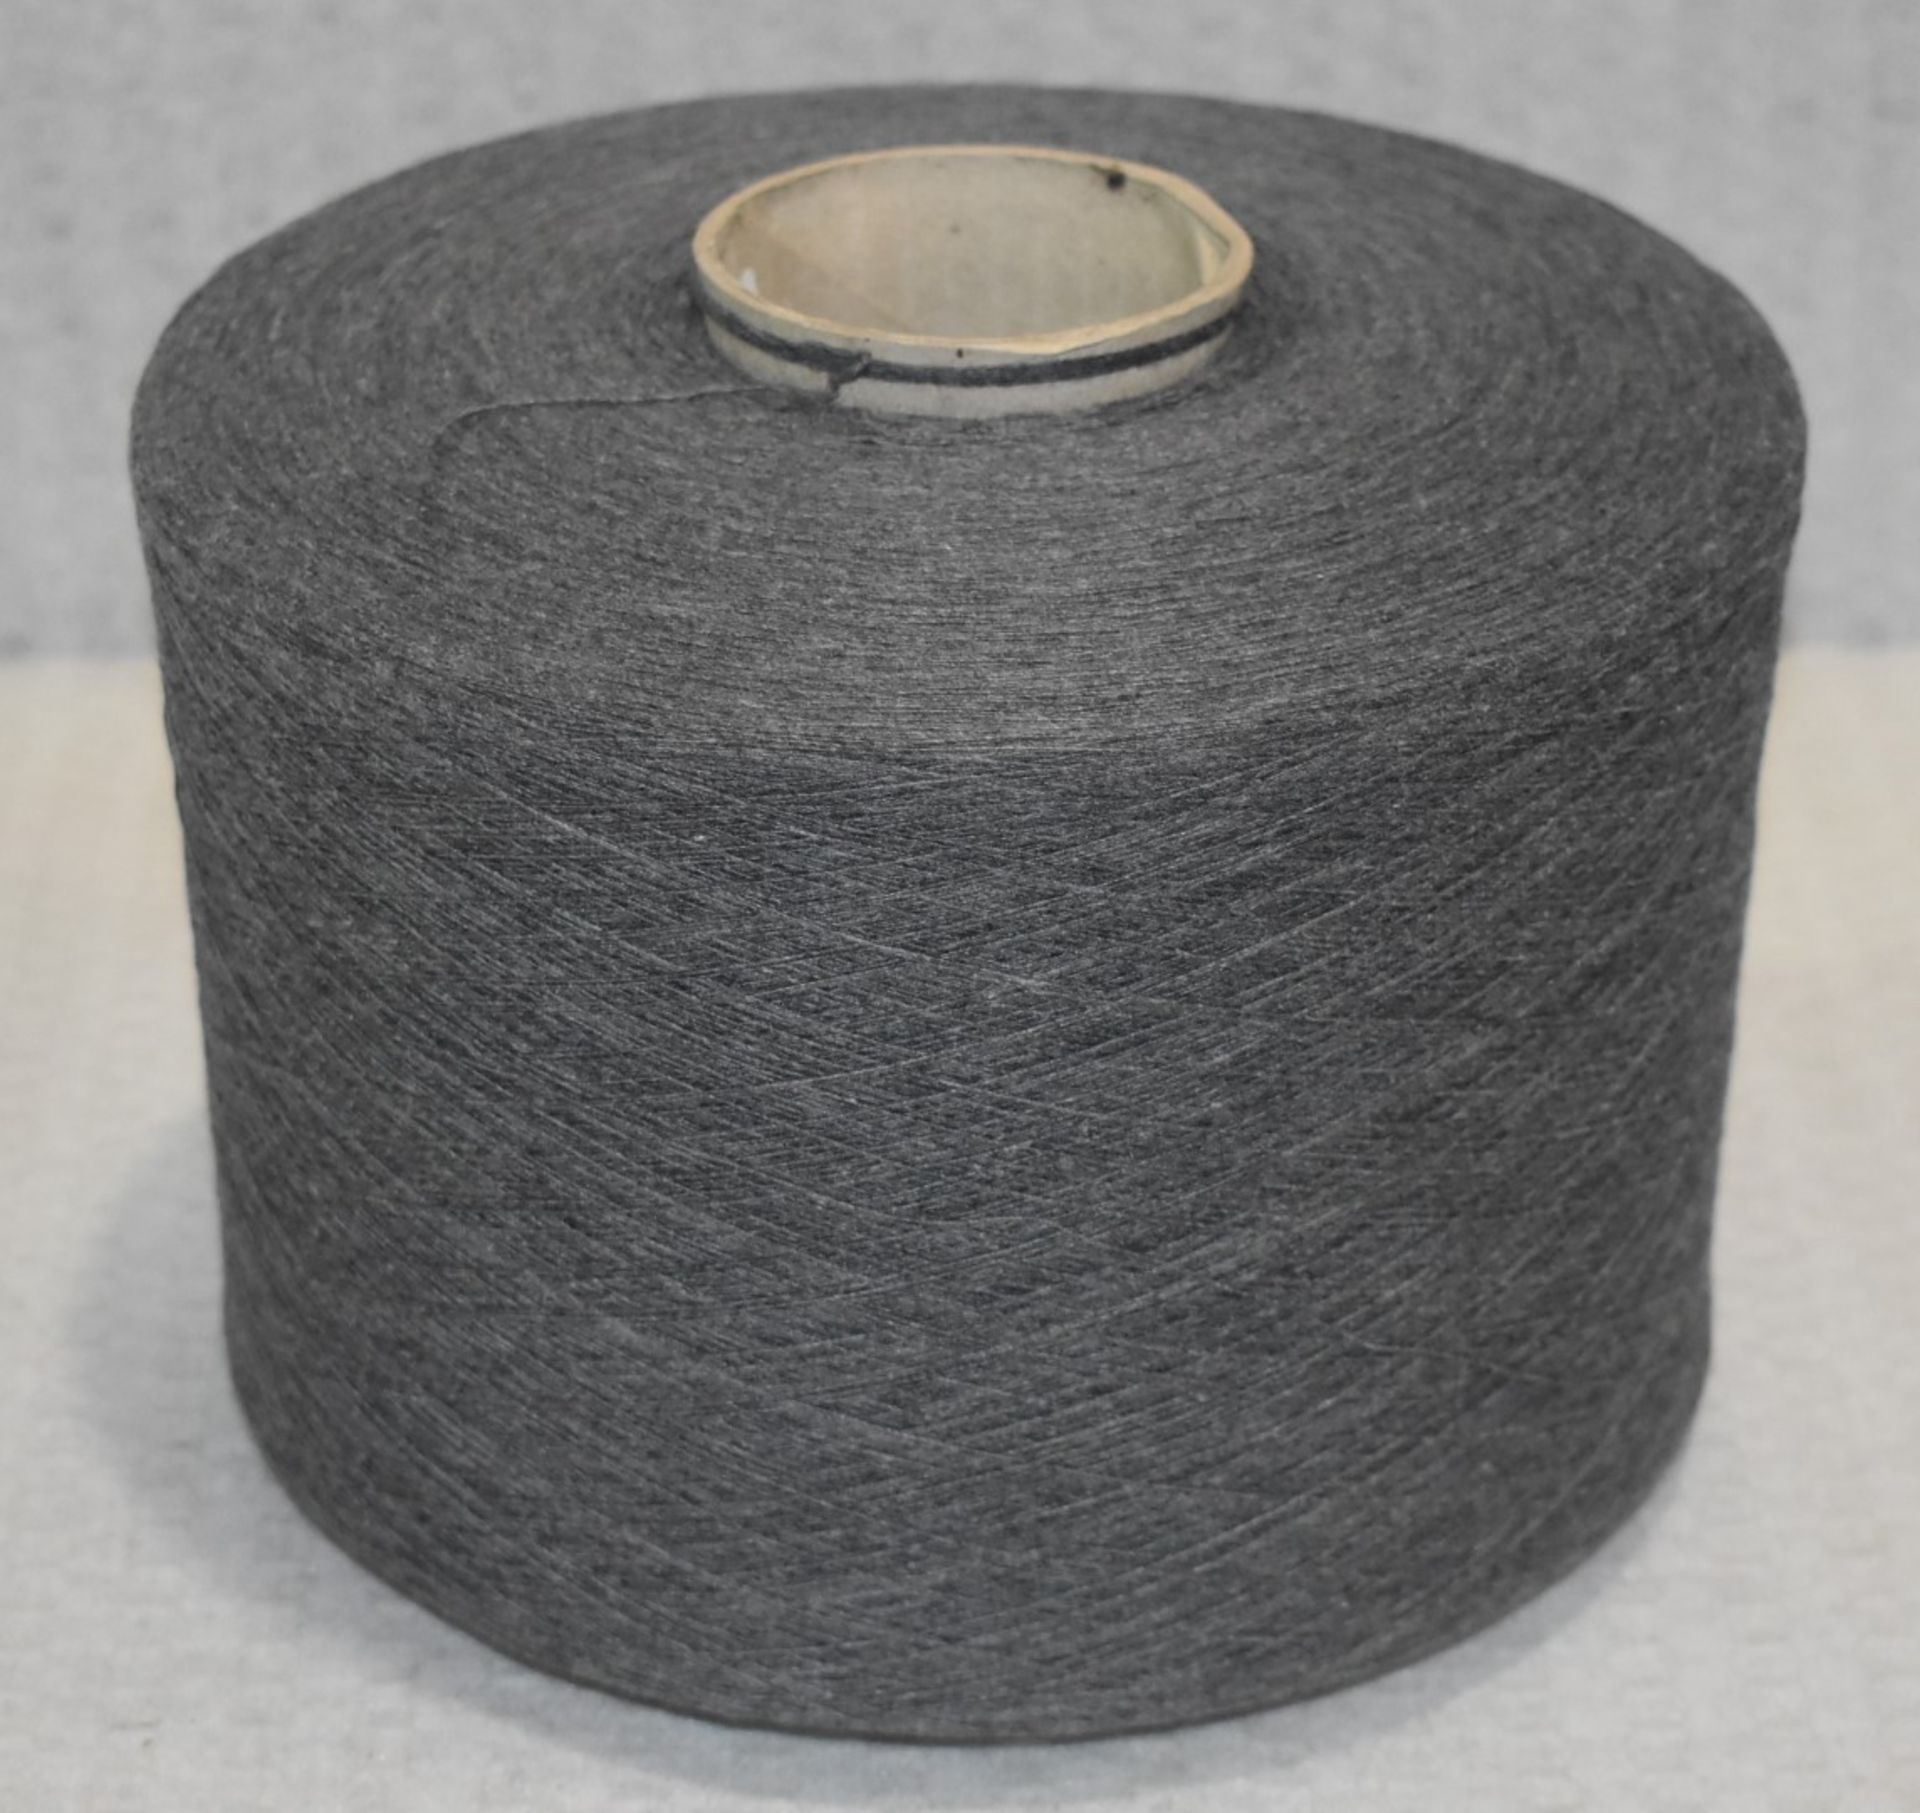 4 x Cones of 1/13 MicroCotton Knitting Yarn - Mid Grey - Approx Weight: 2,500g - New Stock ABL Yarn - Image 8 of 11